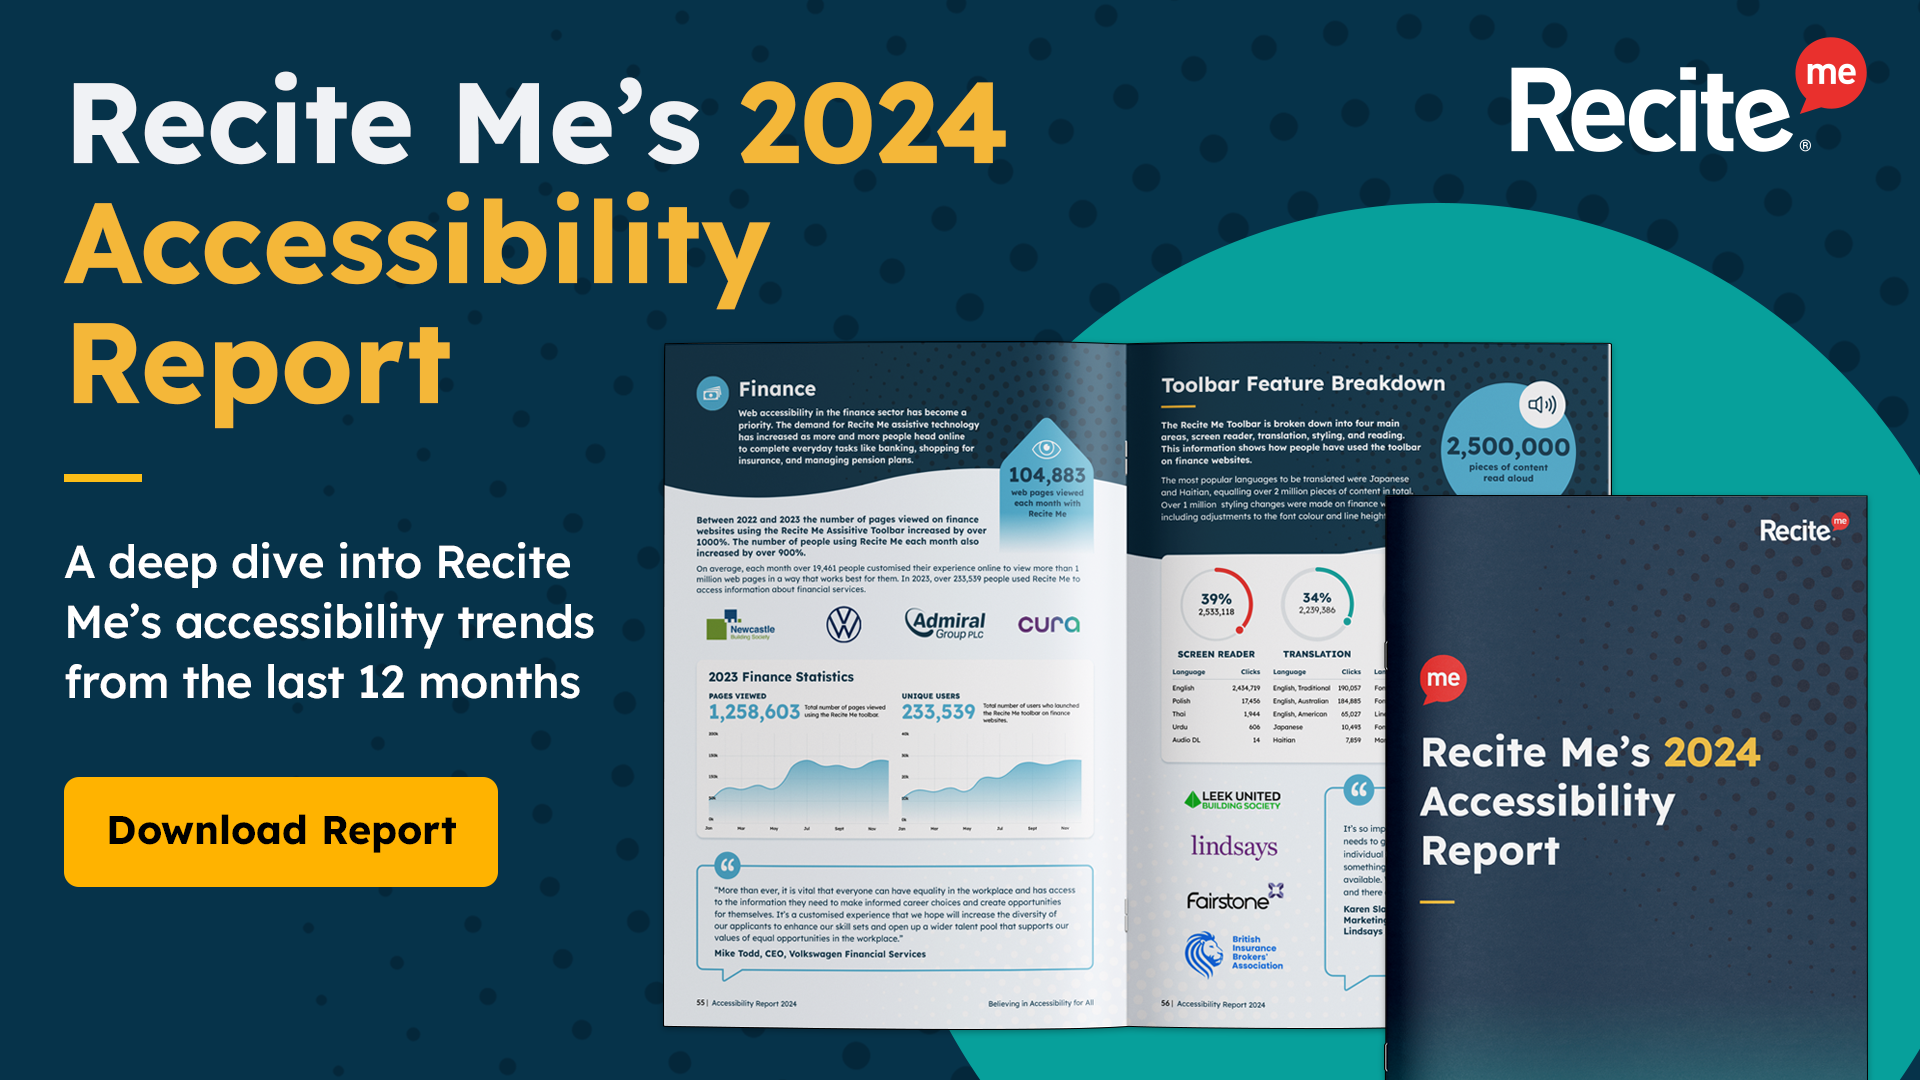 Recite Me's 2024 Accessibility Report. A deep dive into accessibility trends from the last 12 months